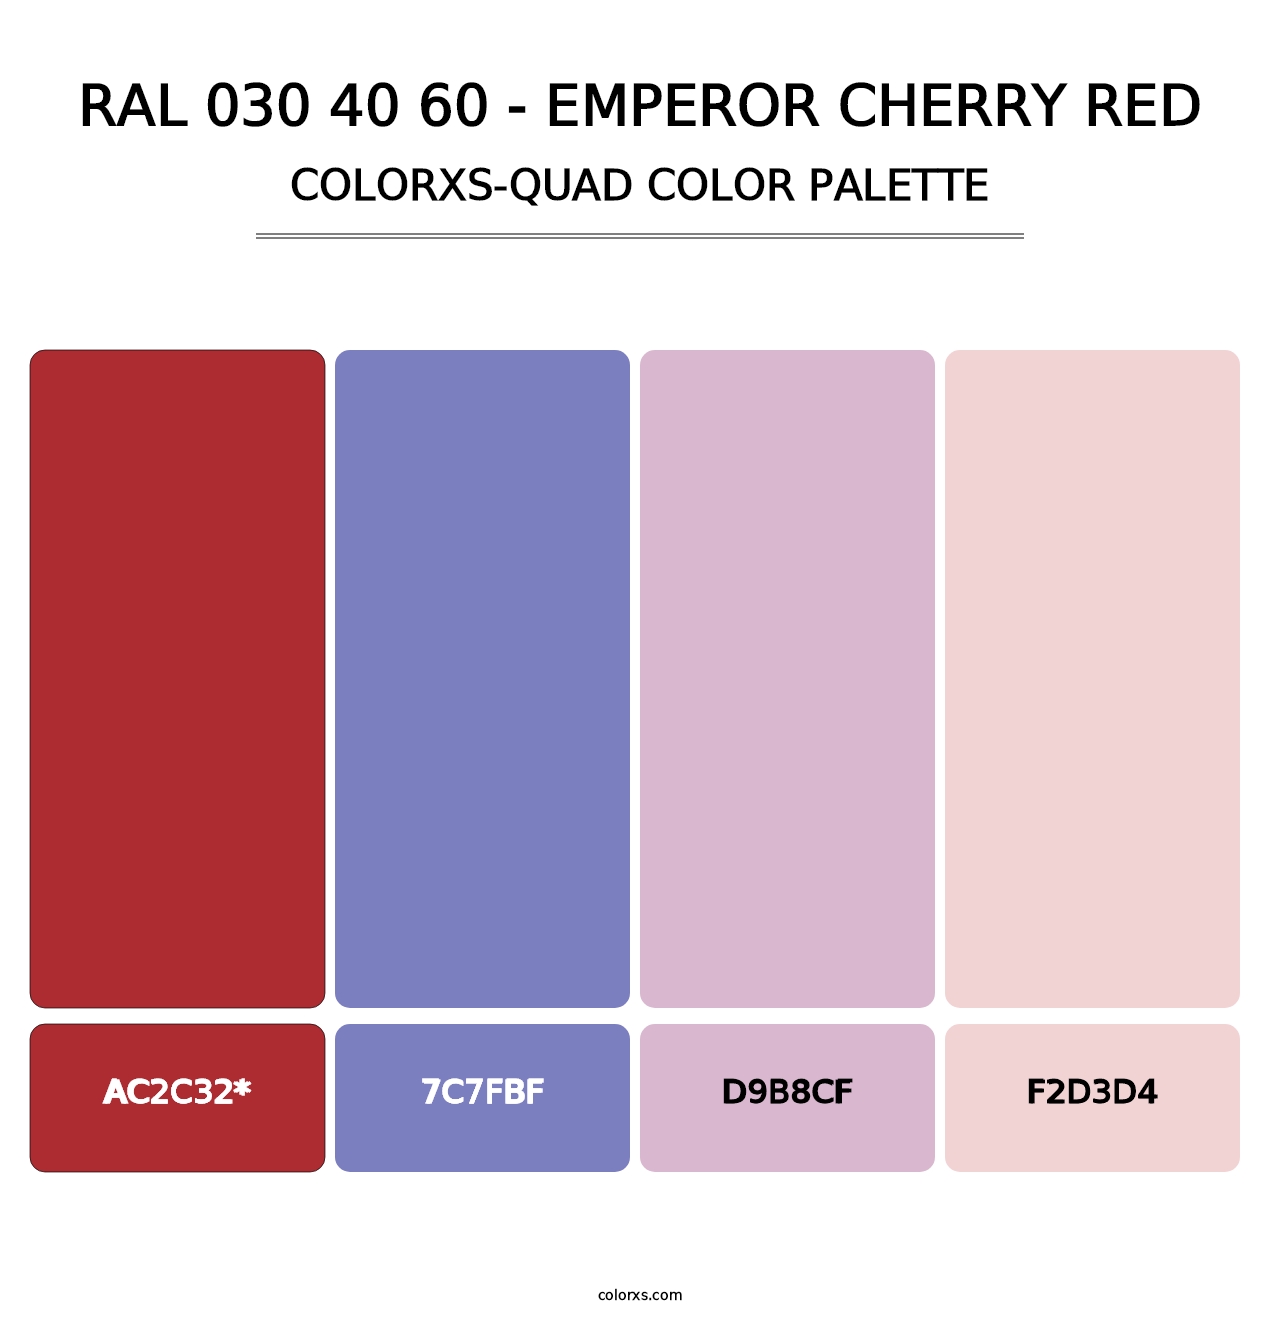 RAL 030 40 60 - Emperor Cherry Red - Colorxs Quad Palette